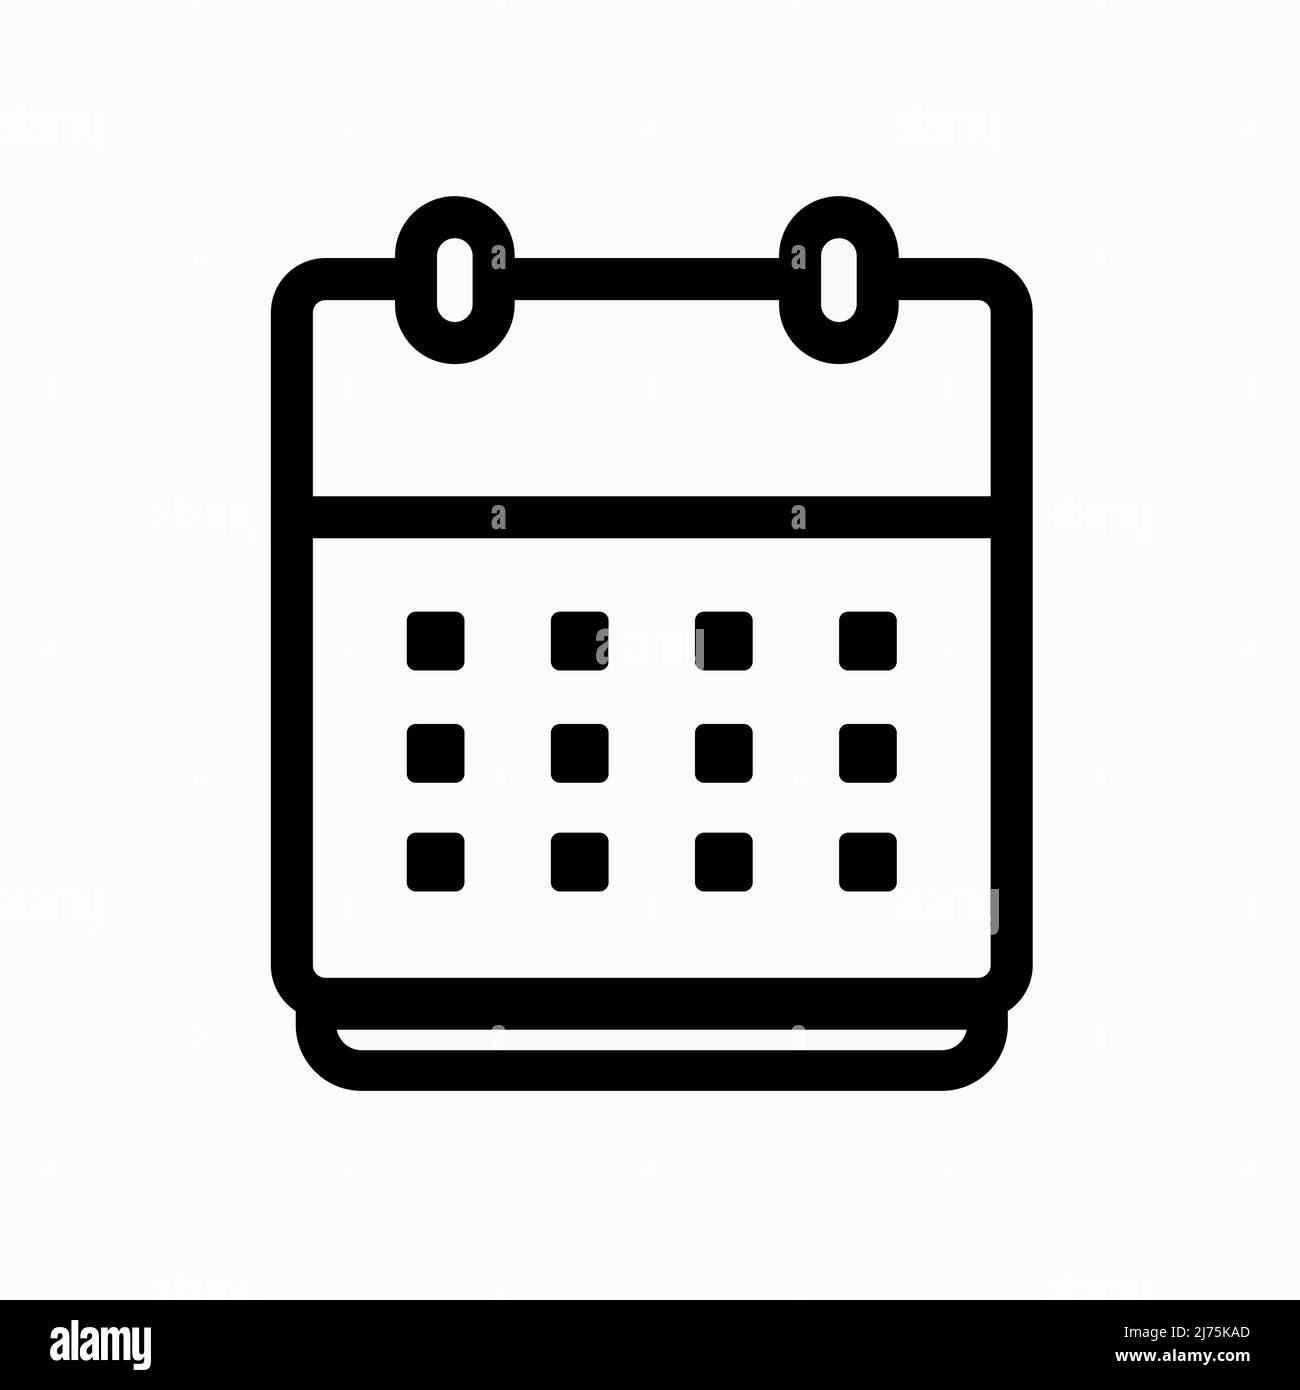 Calendar, Schedule, date icon vector isolated on white background Stock